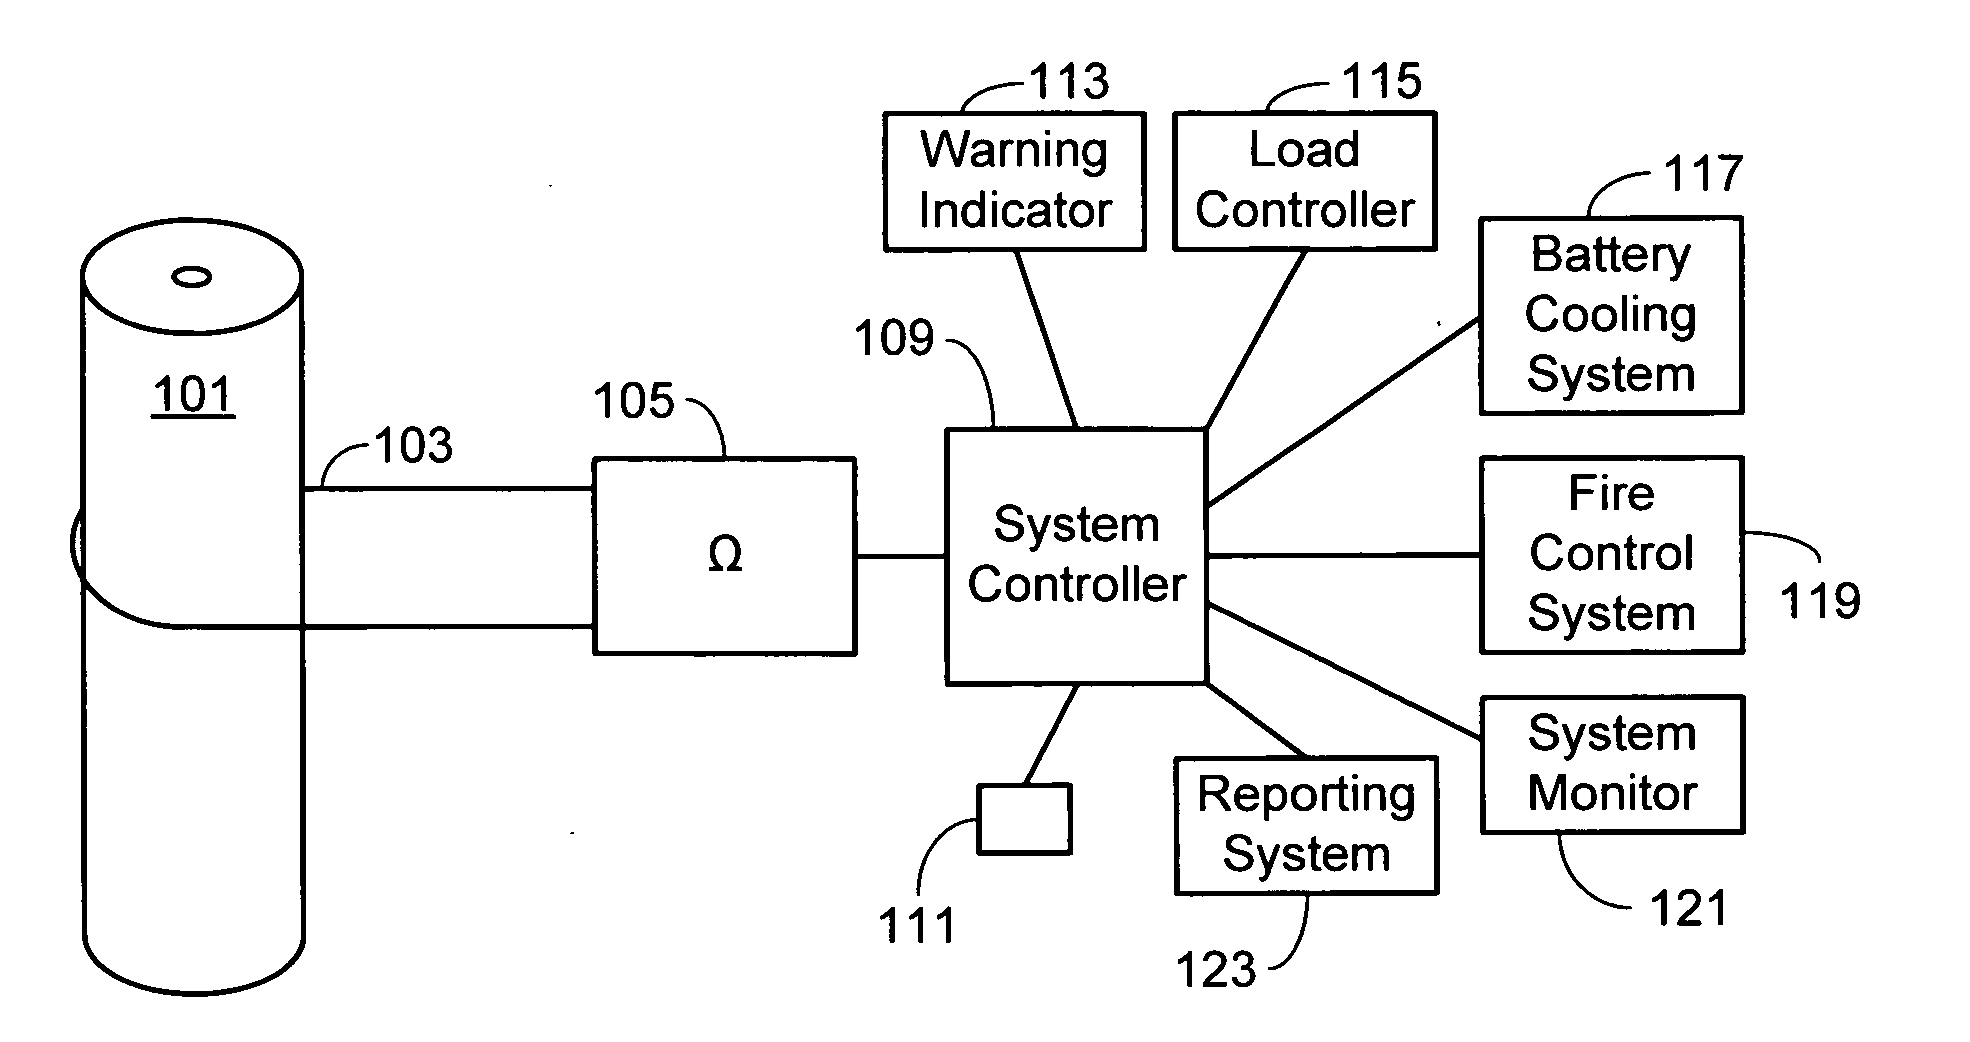 Battery thermal event detection system using a thermally interruptible electrical conductor